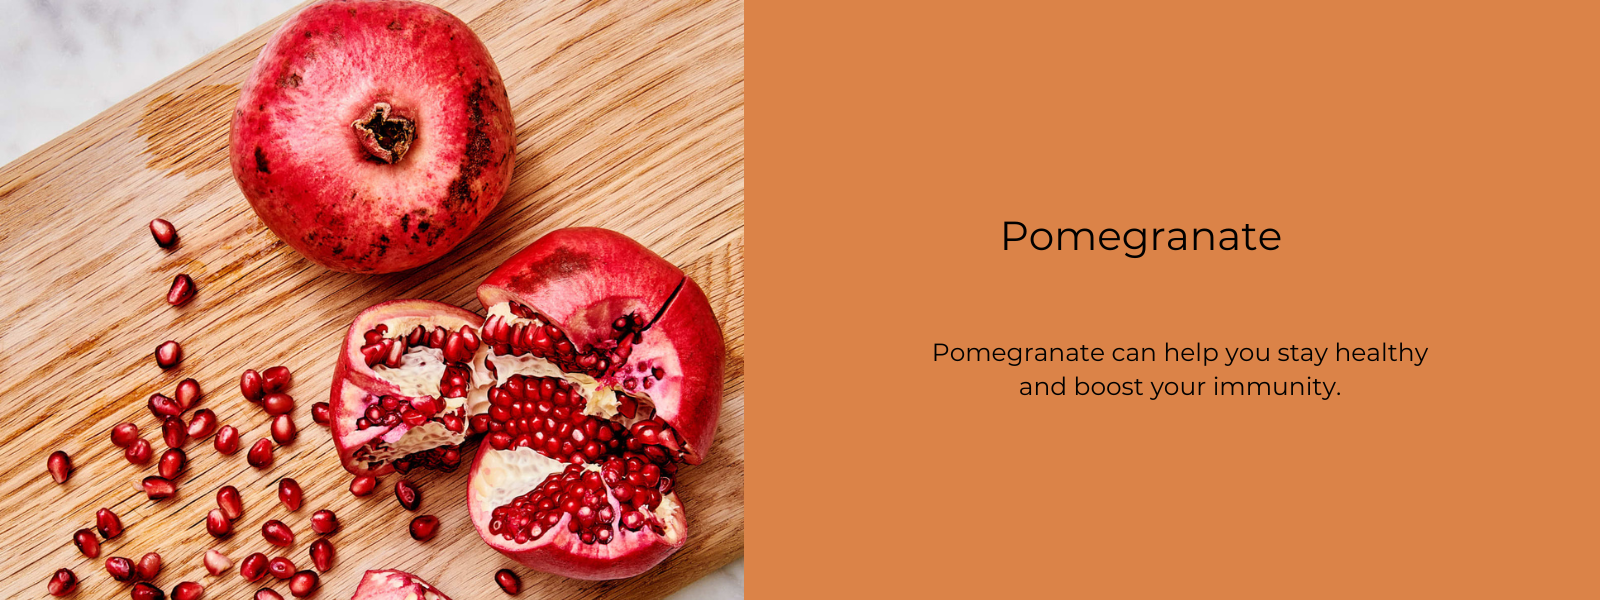 Pomegranate - Health Benefits, Uses and Important Facts